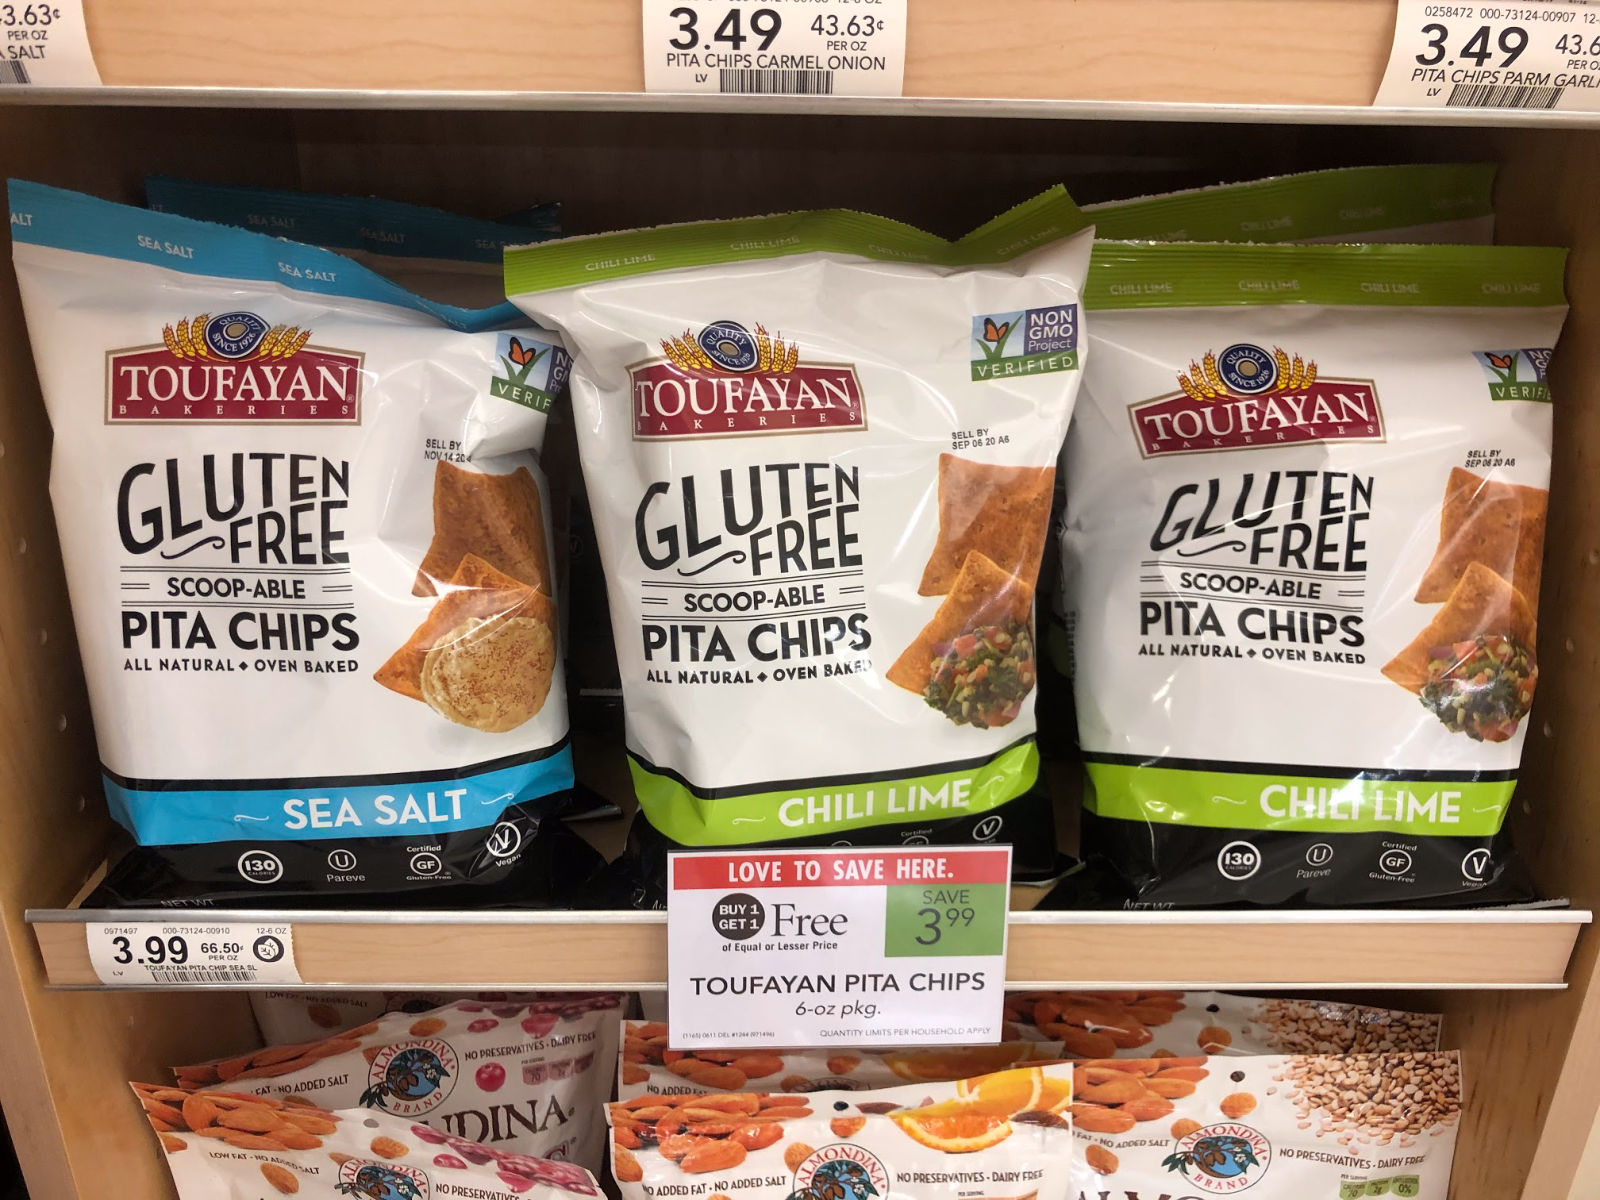 Toufayan Gluten-Free Scoop-Able Pita Chips Are Buy One, Get One FREE At Publix on I Heart Publix